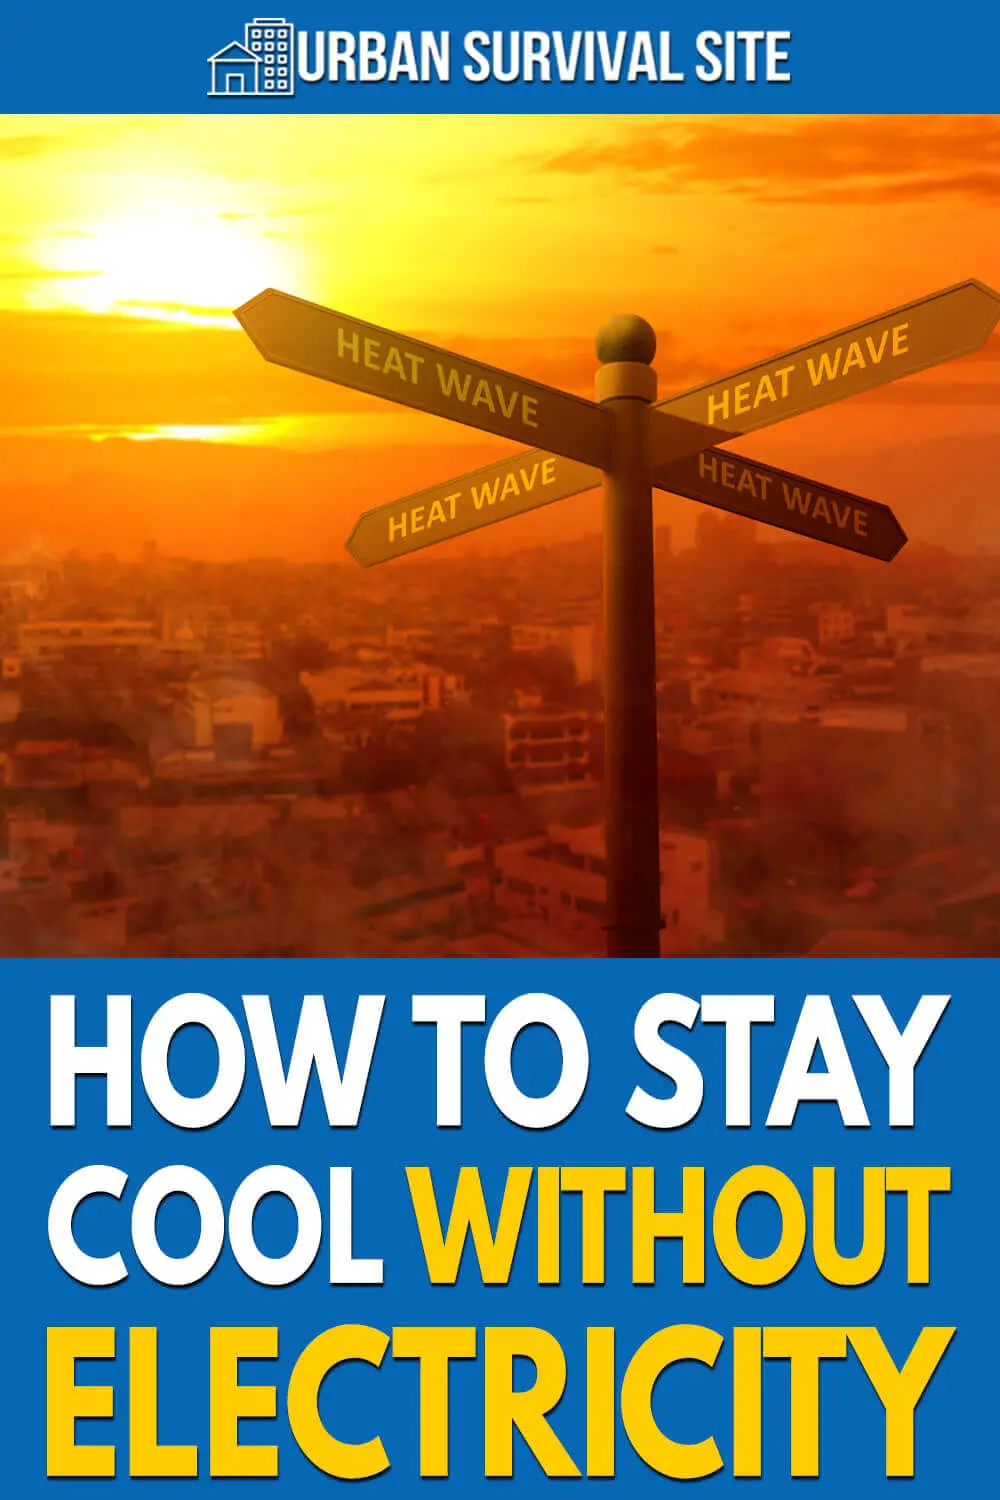 Staying Cool-Solutions and Ideas When There is NO Power Ngcb11